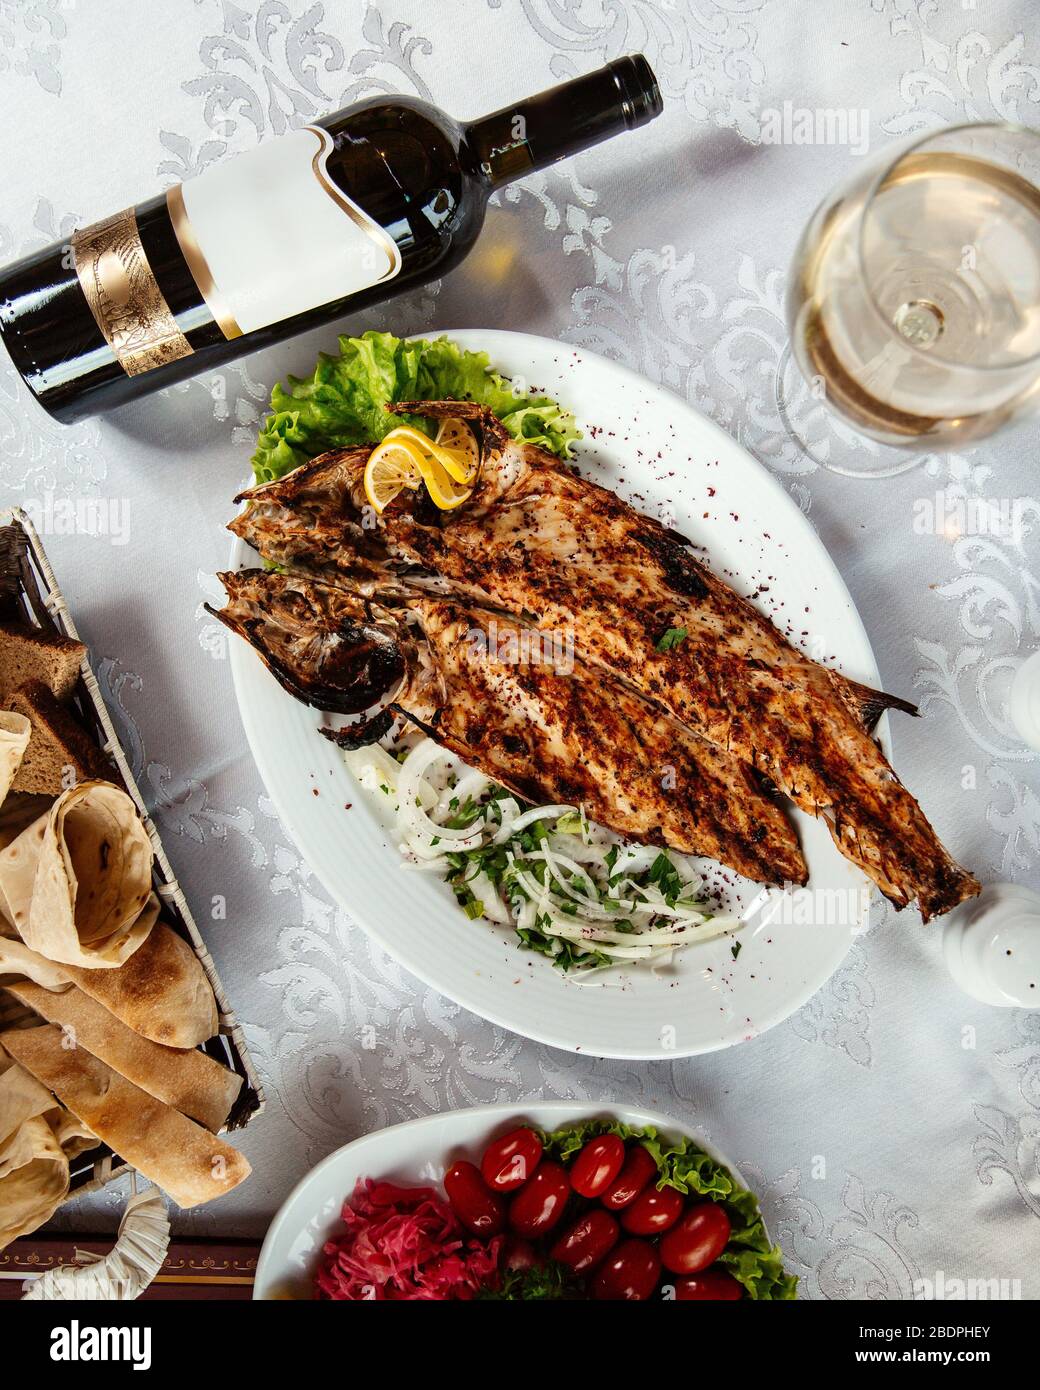 fried fish and bottle of wine Stock Photo